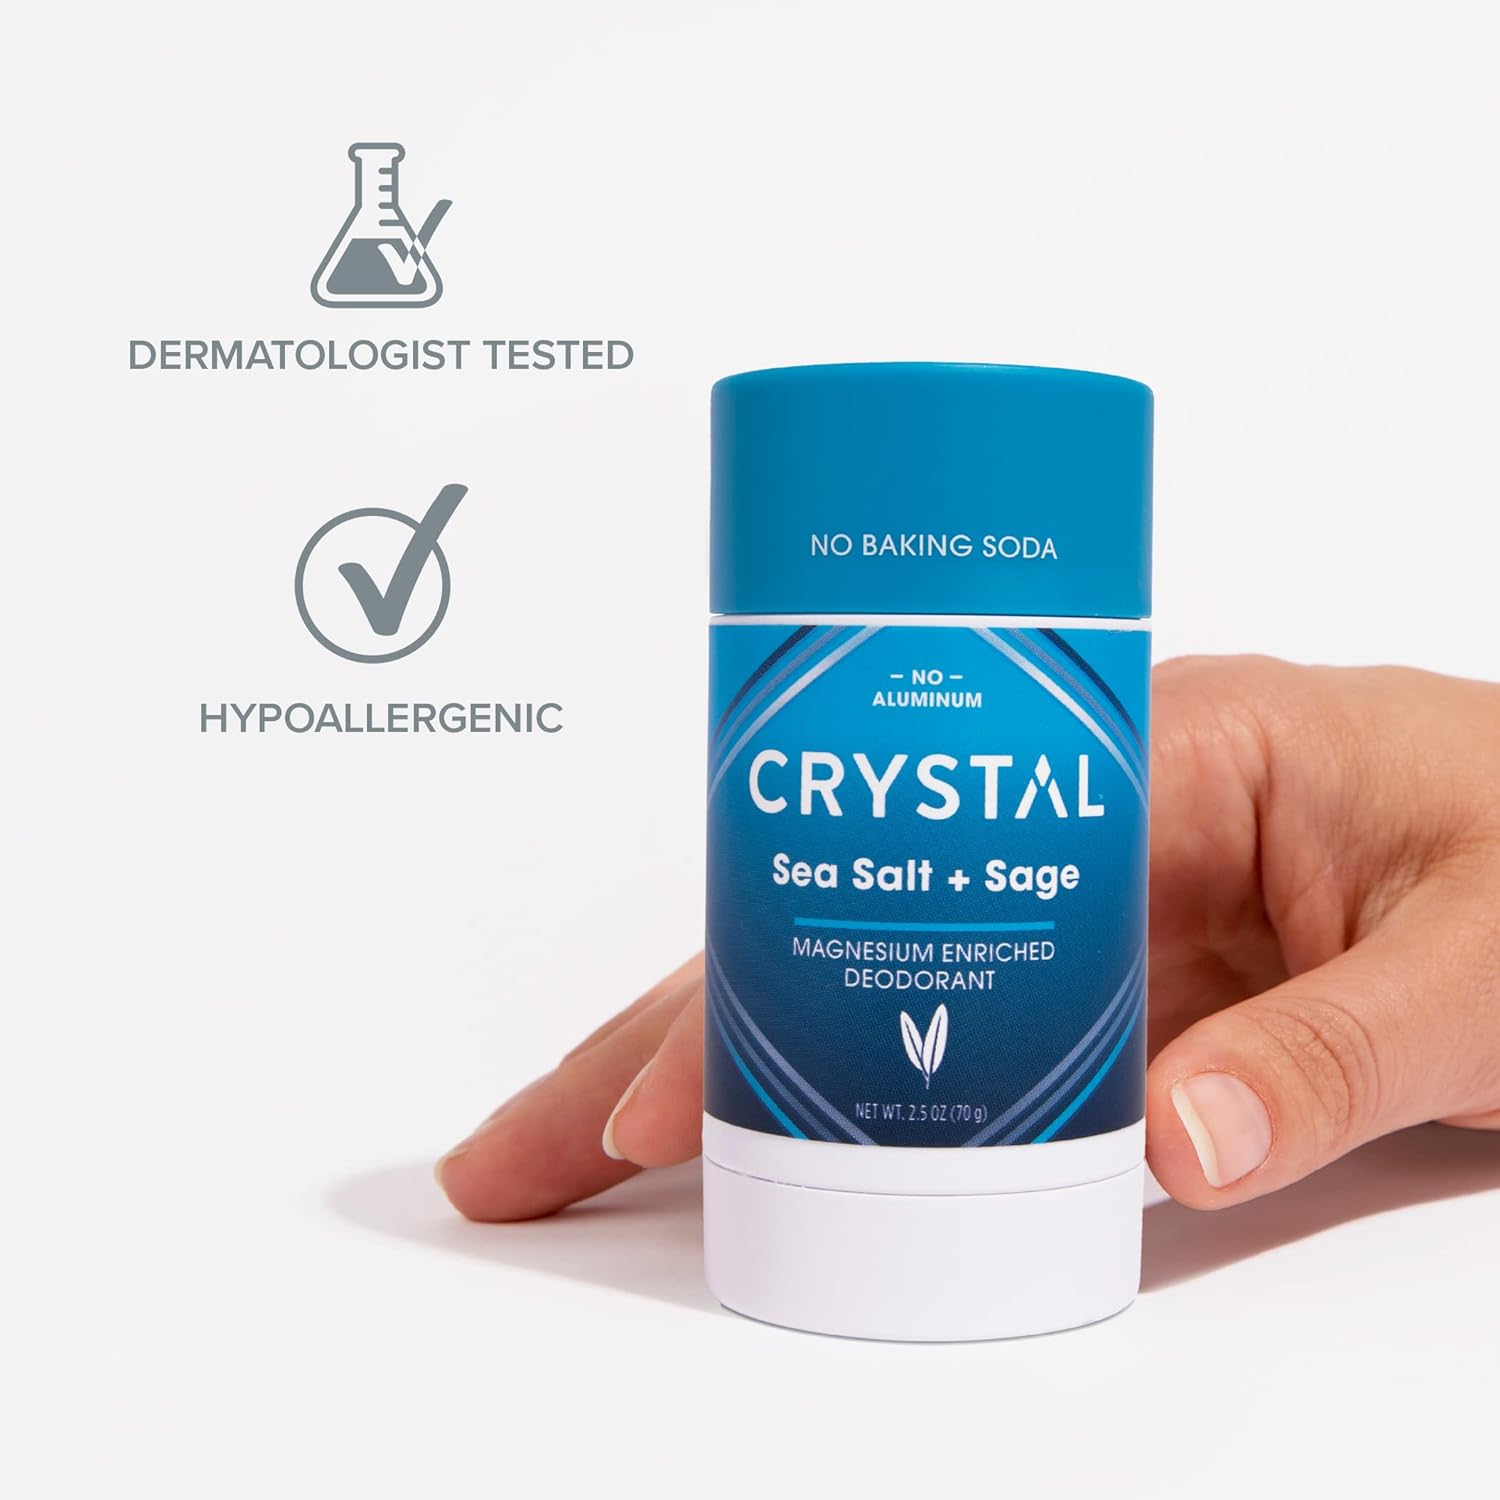 CRYSTAL Magnesium Solid Stick Natural Deodorant, Non-Irritating Aluminum Free Deodorant for Men or Women, Safely and Effectively Fights Odor, Baking Soda Free, Sea Salt + Sage, 2.5 oz (Pack of 2) : Beauty & Personal Care